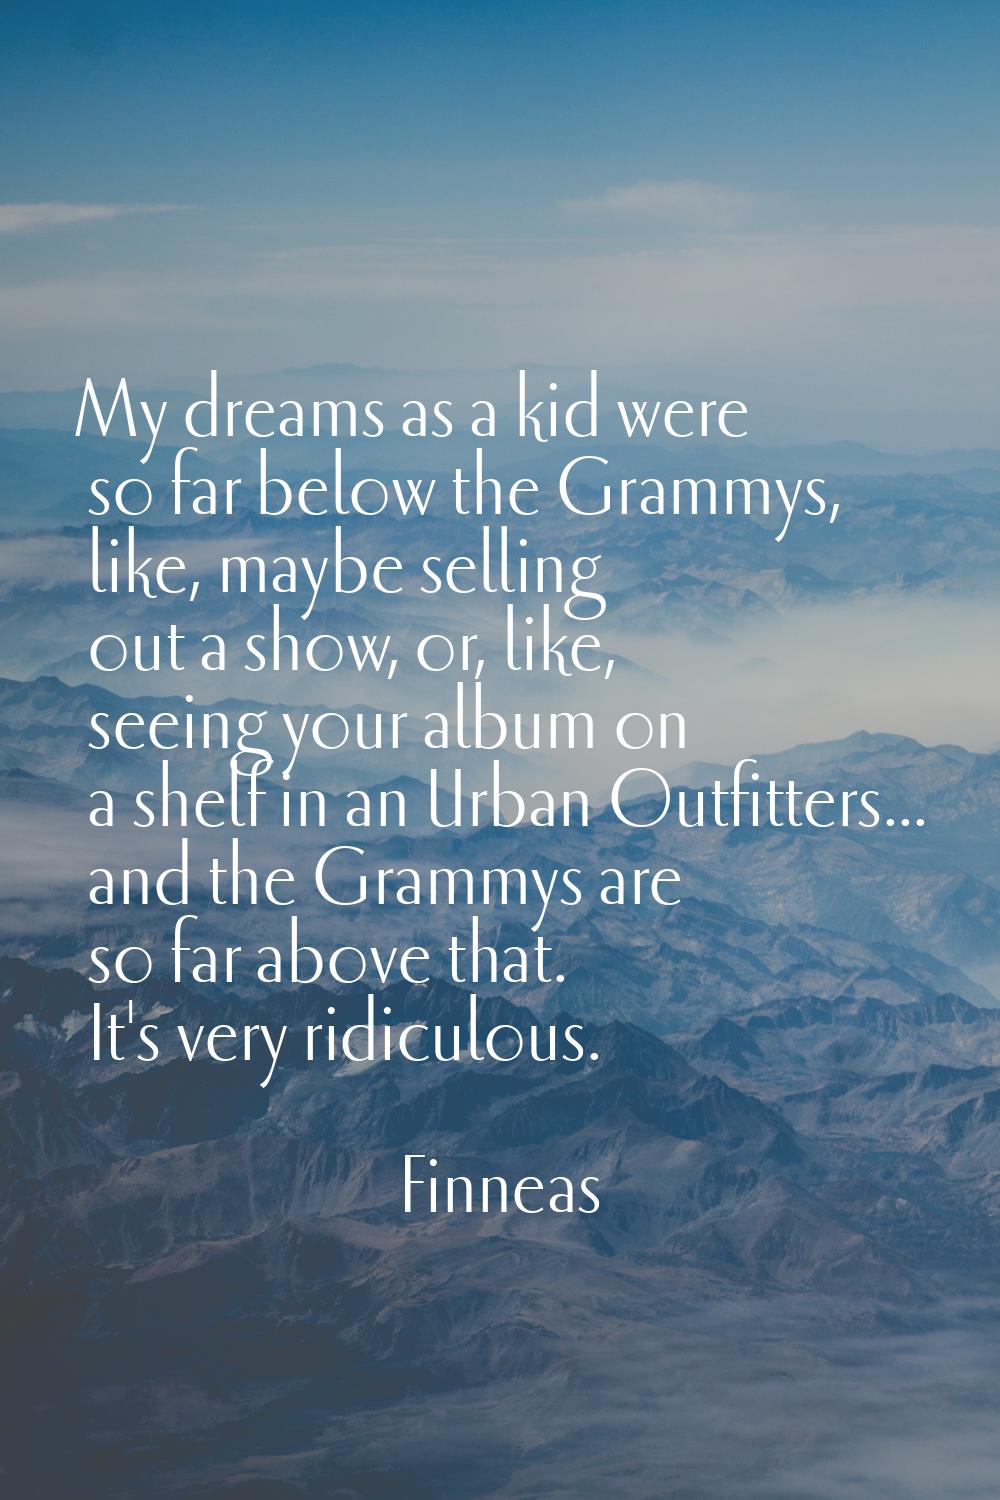 My dreams as a kid were so far below the Grammys, like, maybe selling out a show, or, like, seeing 